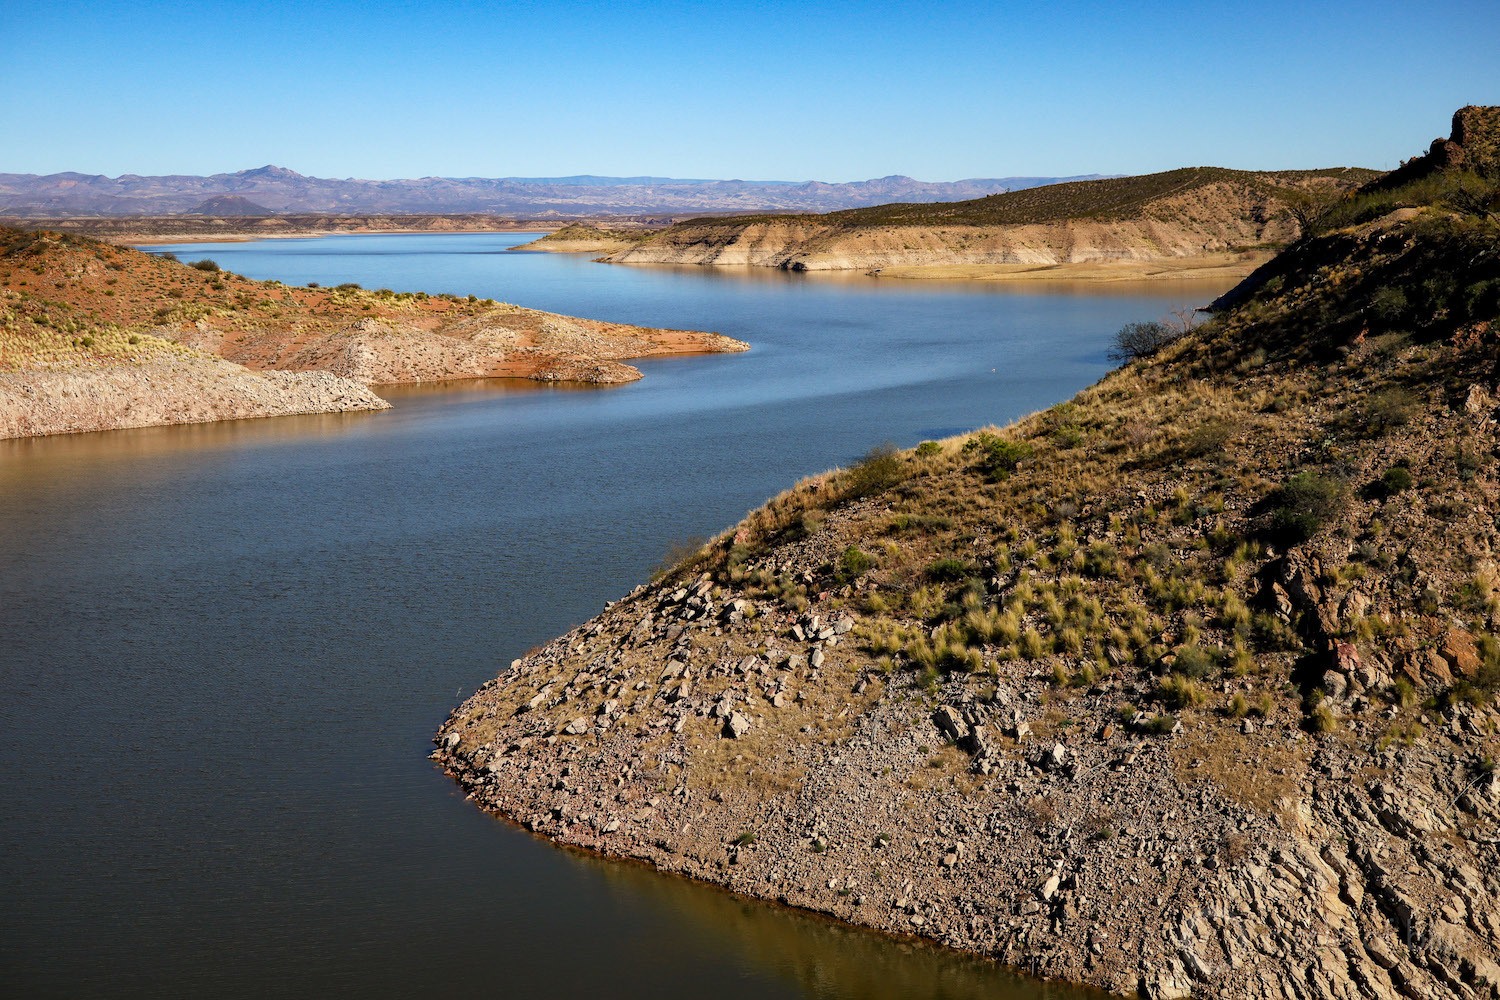 Climate change is intensifying heat and drought in the mountains east of Phoenix and has left San Carlos Lake, formed by 92-year-old Coolidge Dam, 97 percent empty.